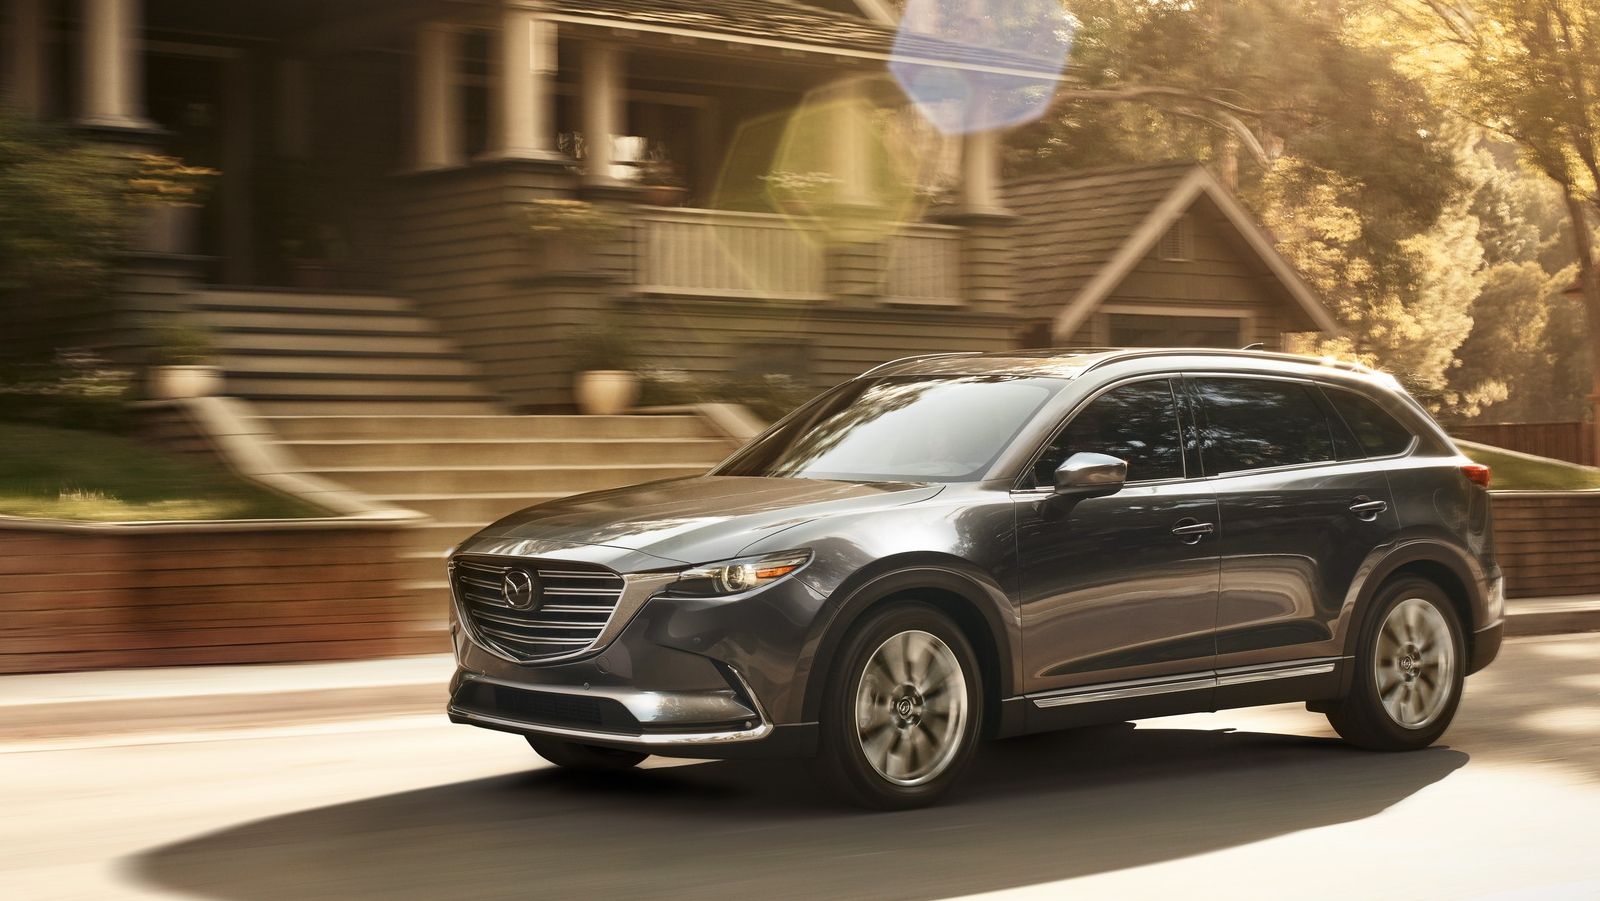 2019 2019 Mazda CX-9 With Much More Gear For A Bit More Money